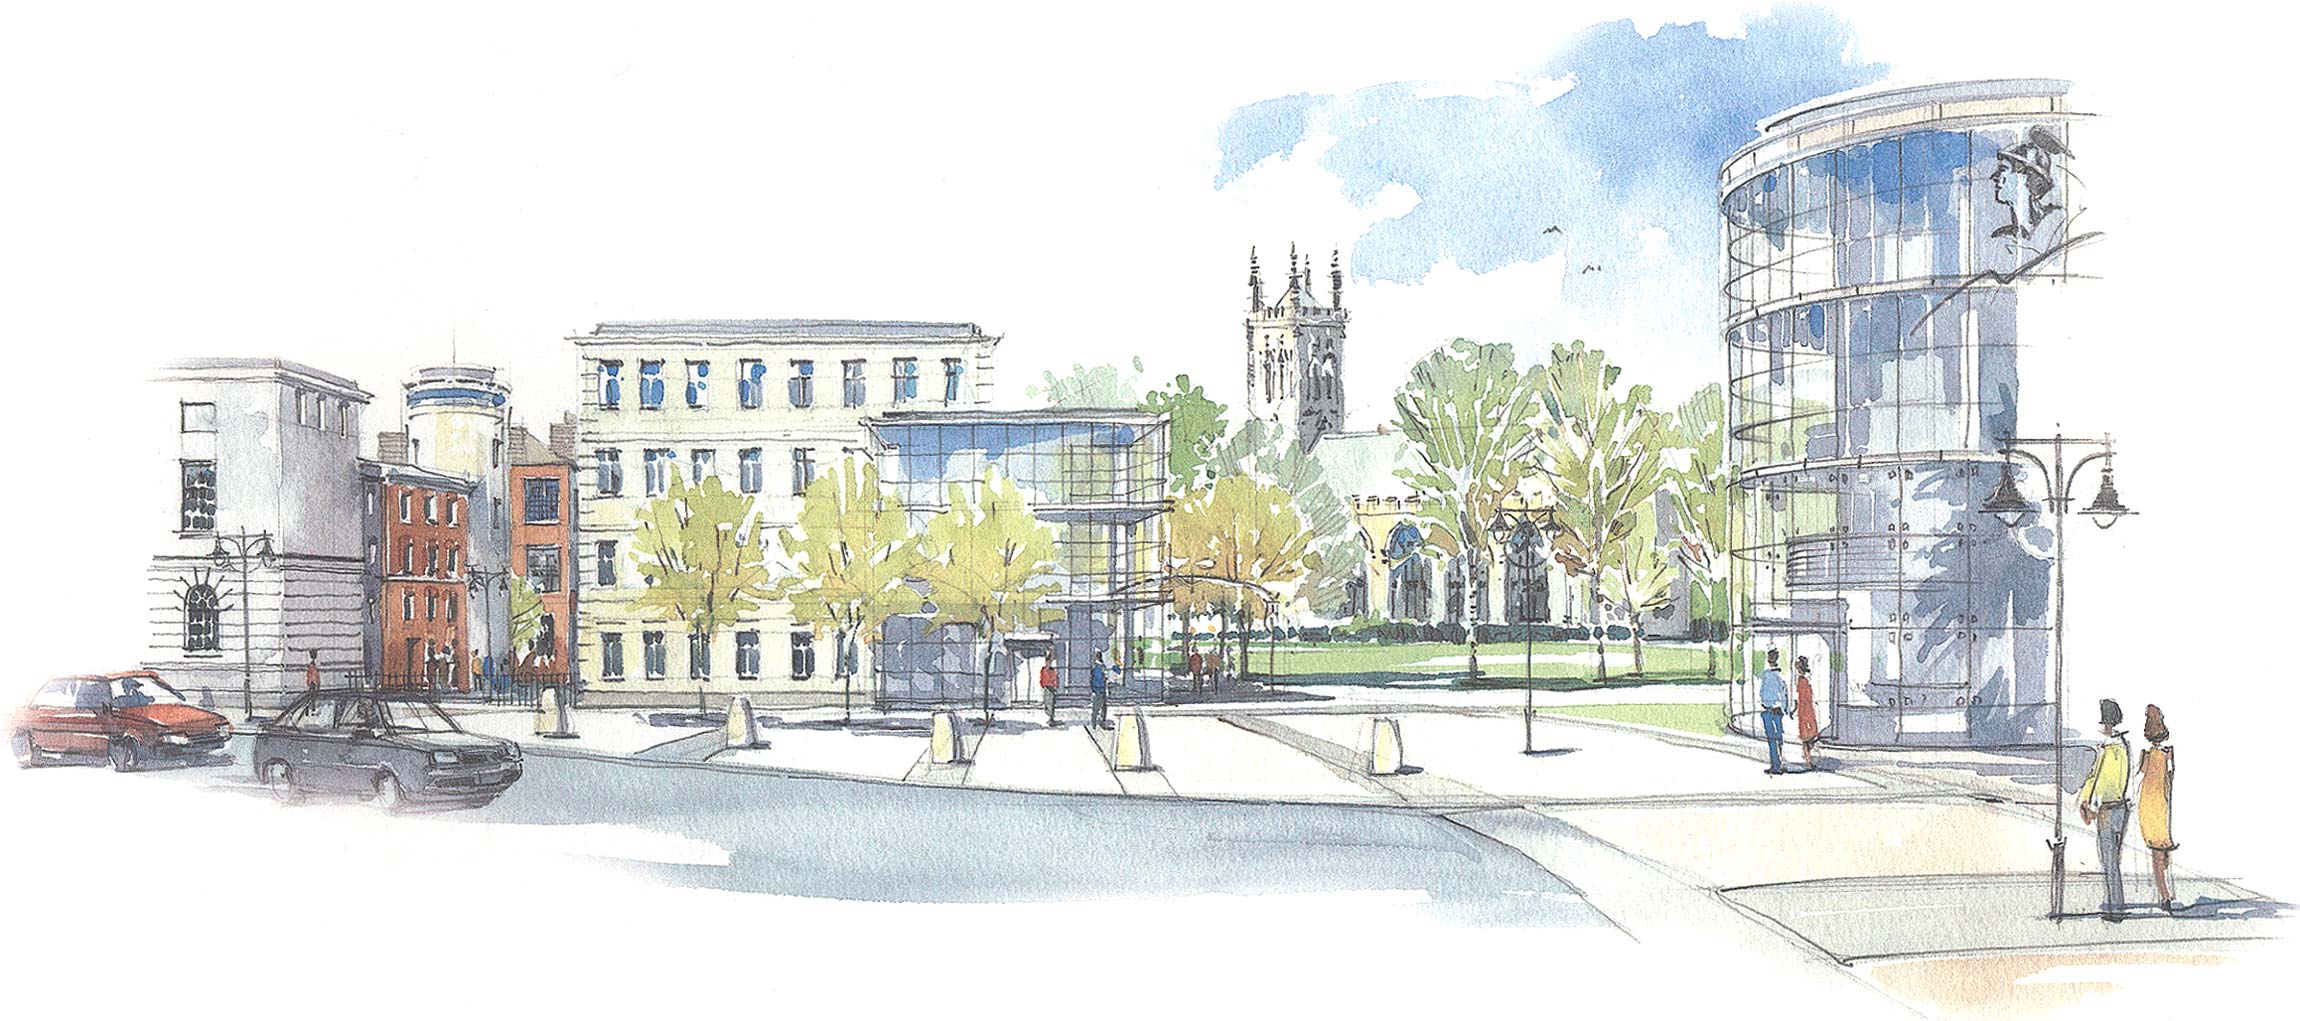 Large full width watercolor illustration of the regenerated St. George's Quarter in Leicester, shows a fresh modern city scene